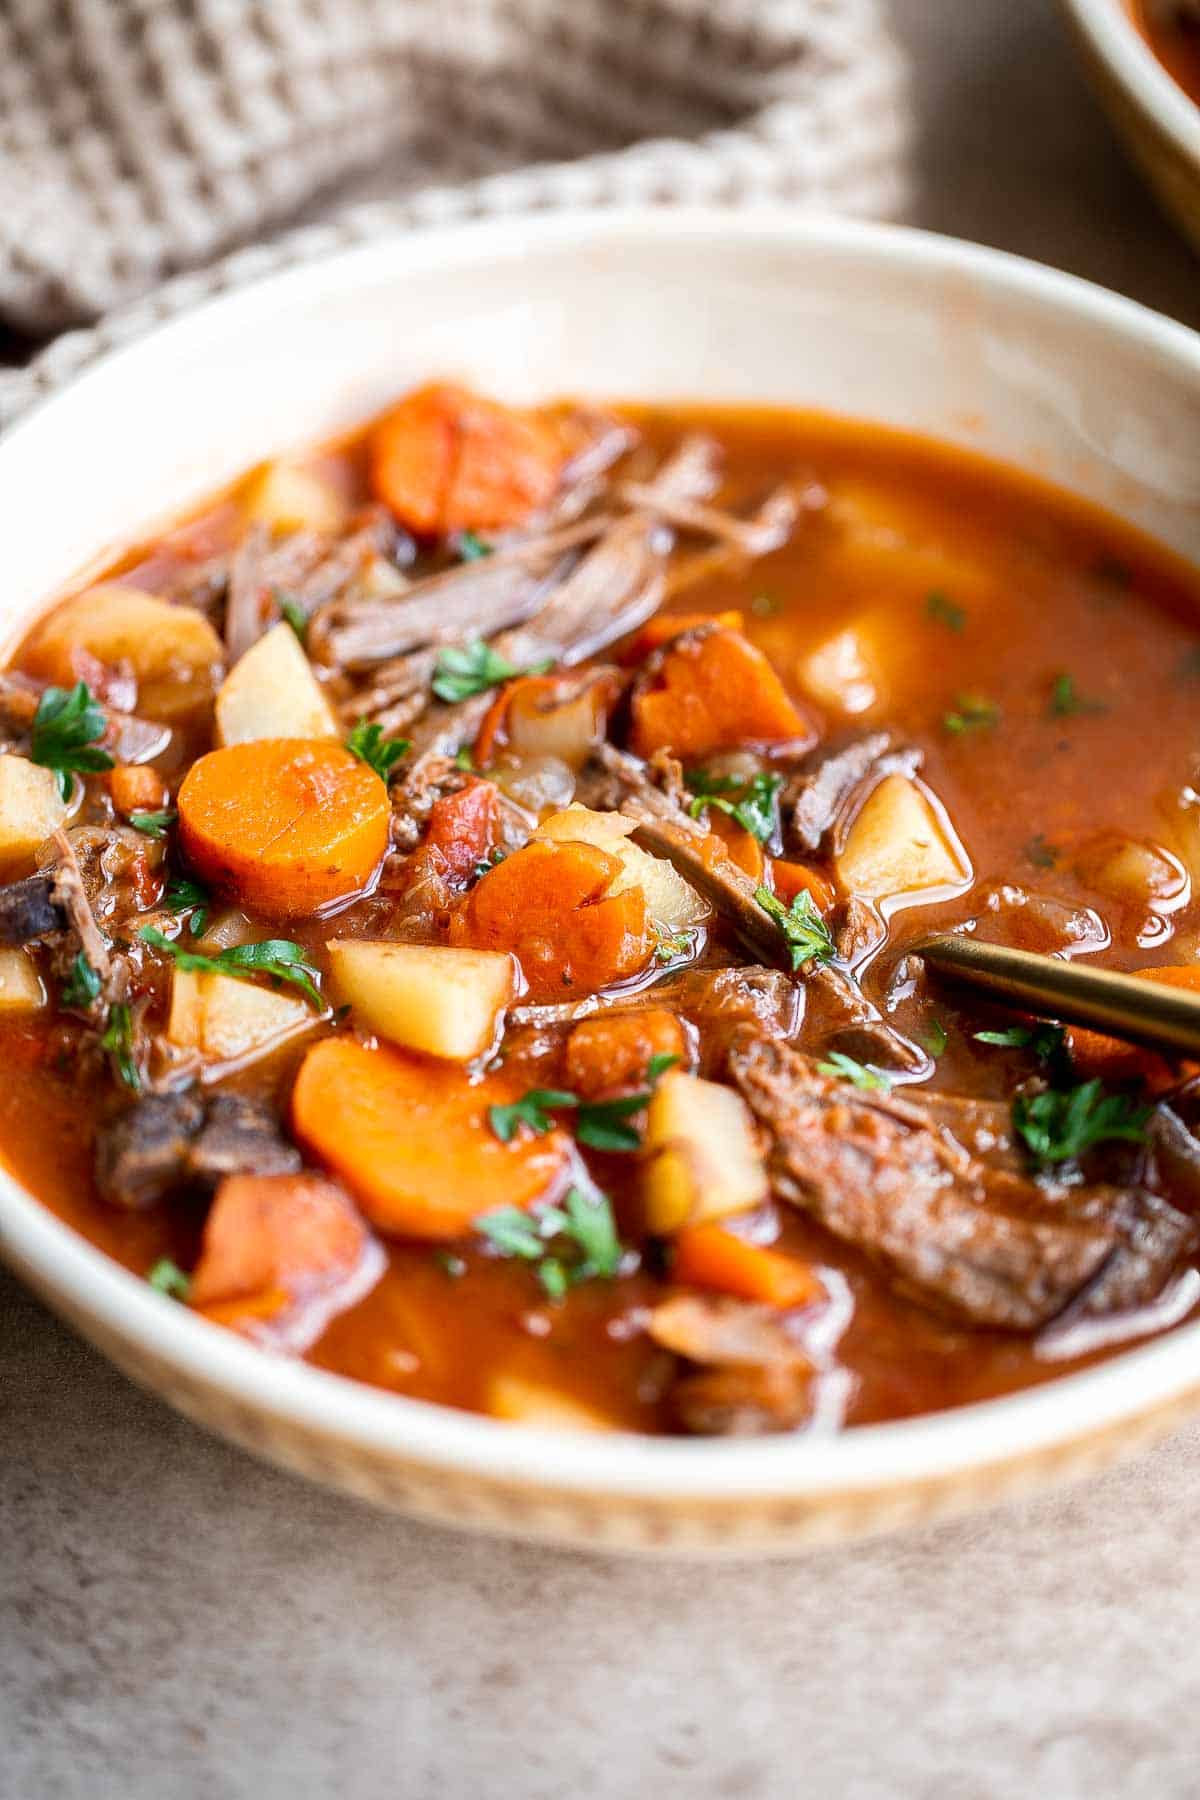 This easy Pot Roast Soup is made in 30 minutes with leftover beef and veggies simmered in broth. It’s hearty, flavorful, and nourishing comfort food. | aheadofthyme.com